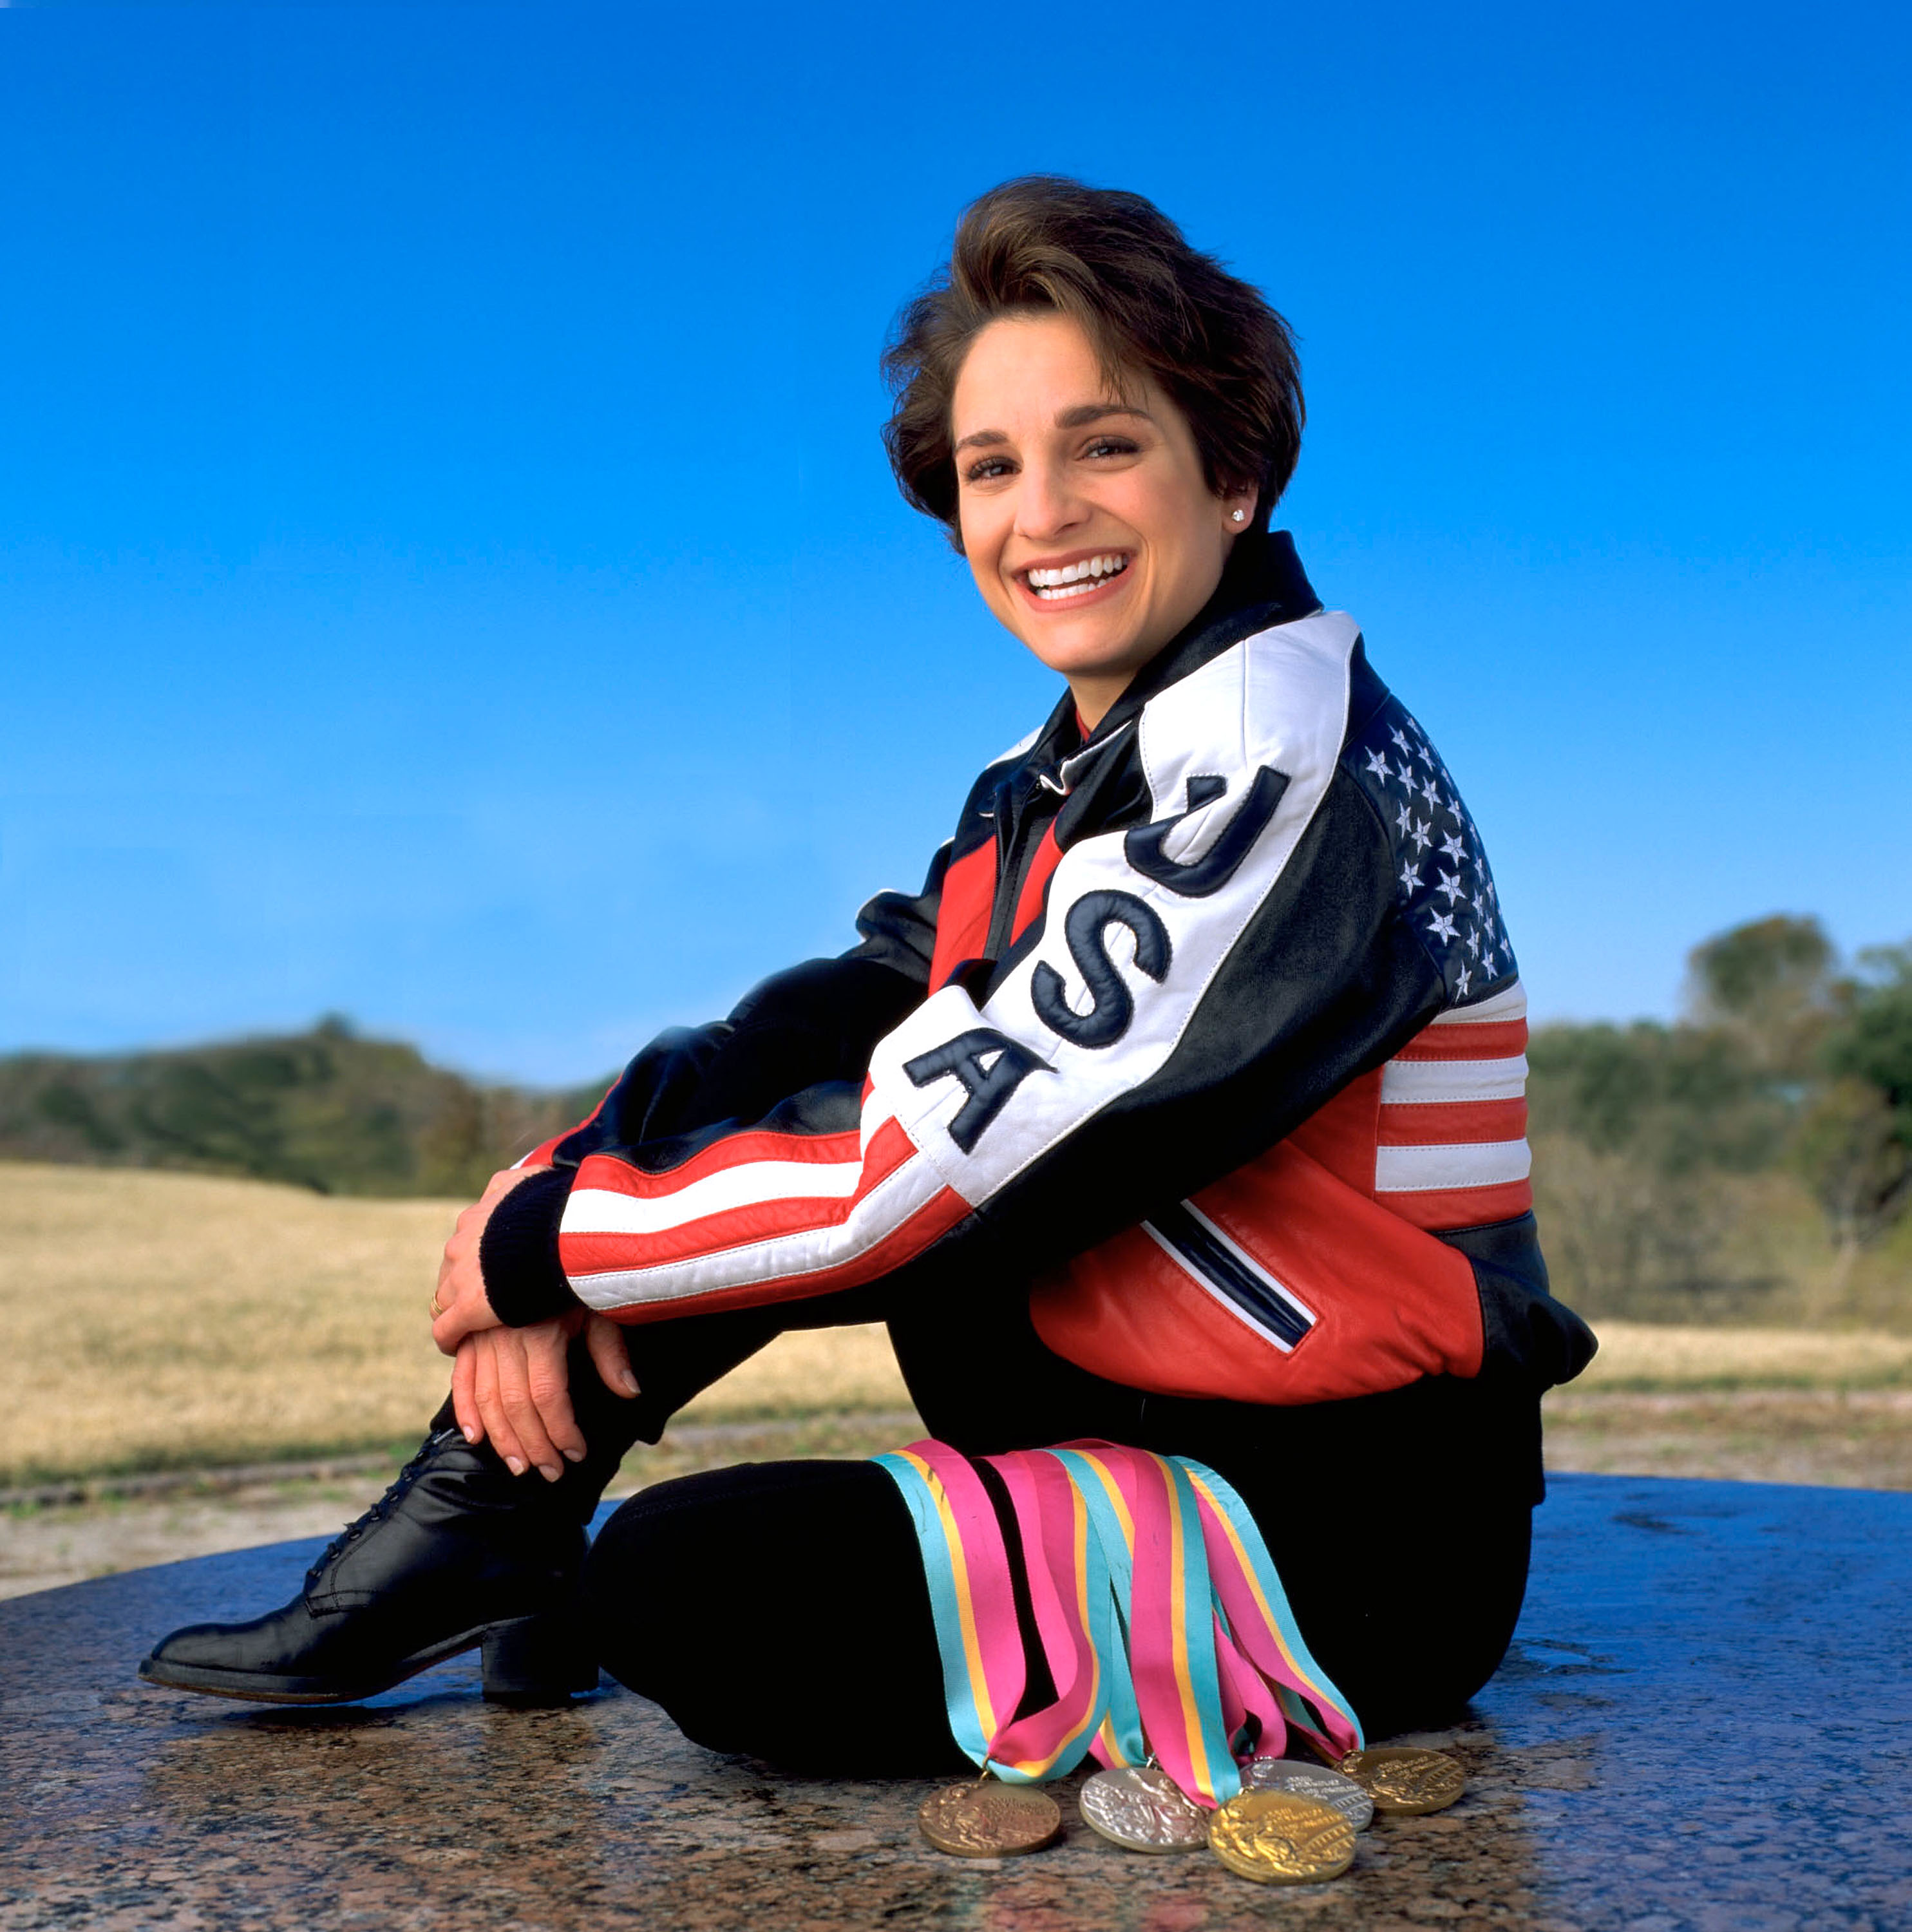 Mary Lou Retton on October 27, 2000 in Houston, Texas | Source: Getty Images